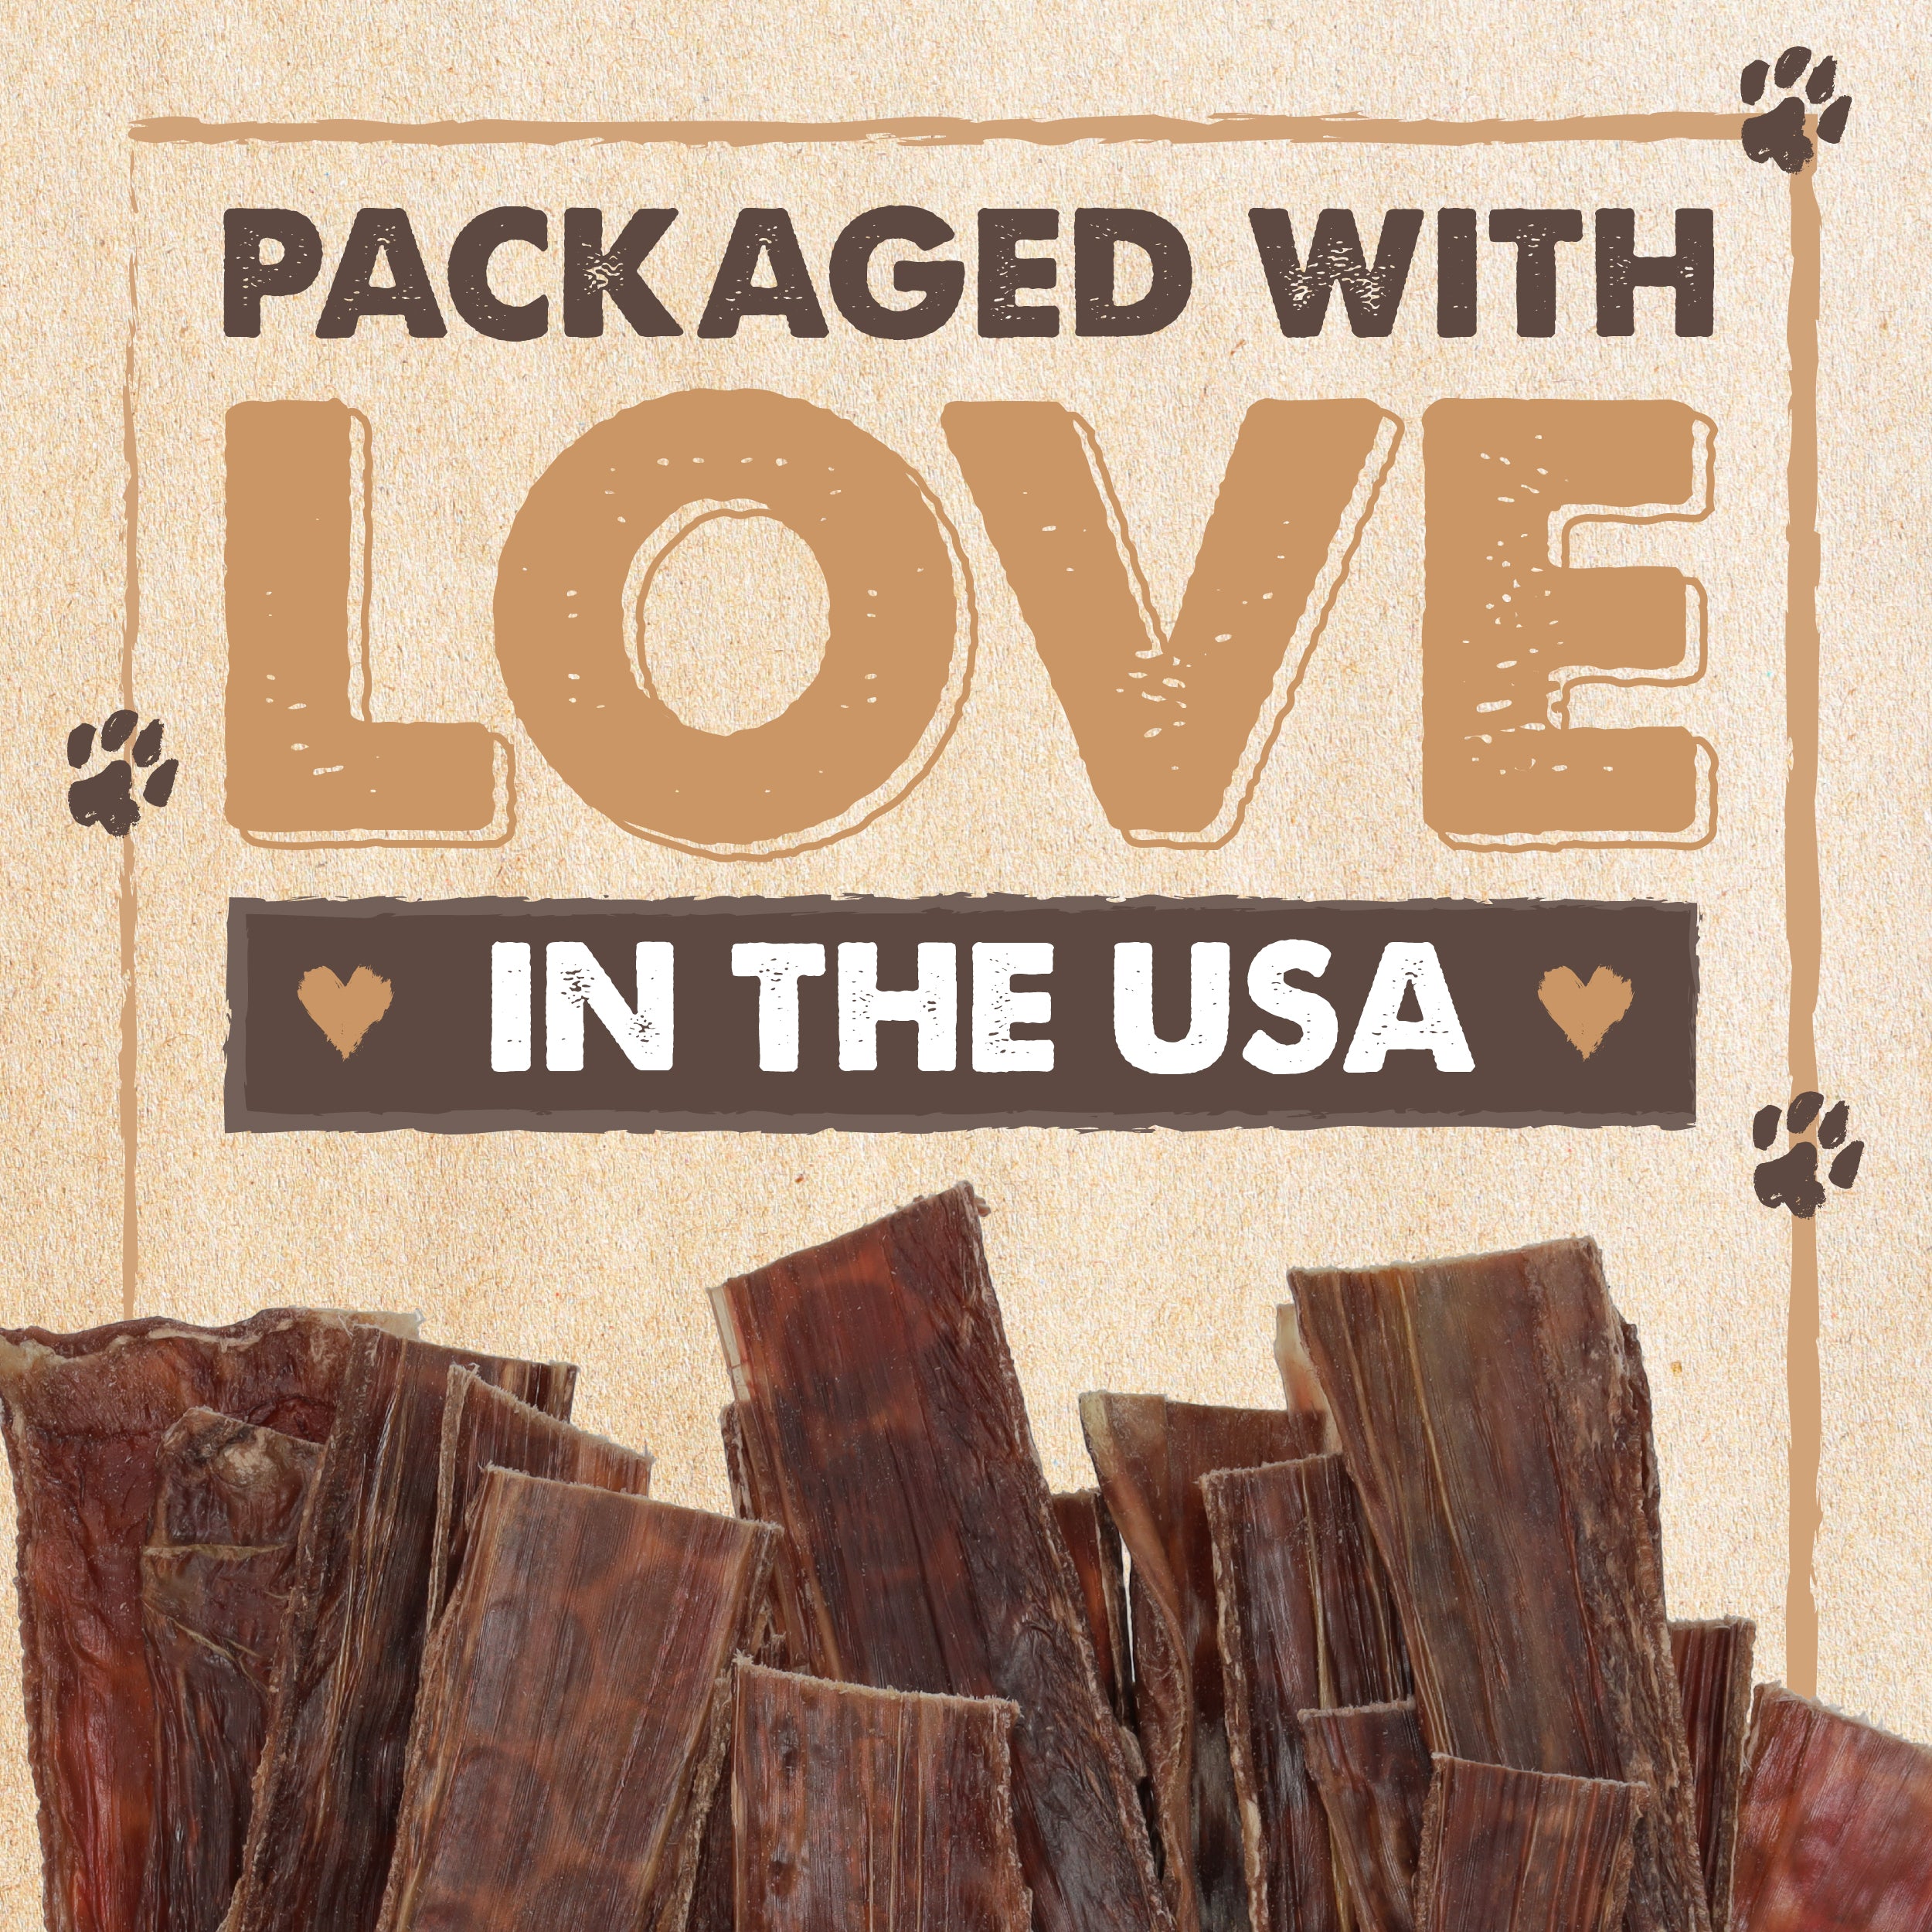 All-Natural Beef Gullet Jerky for Dogs